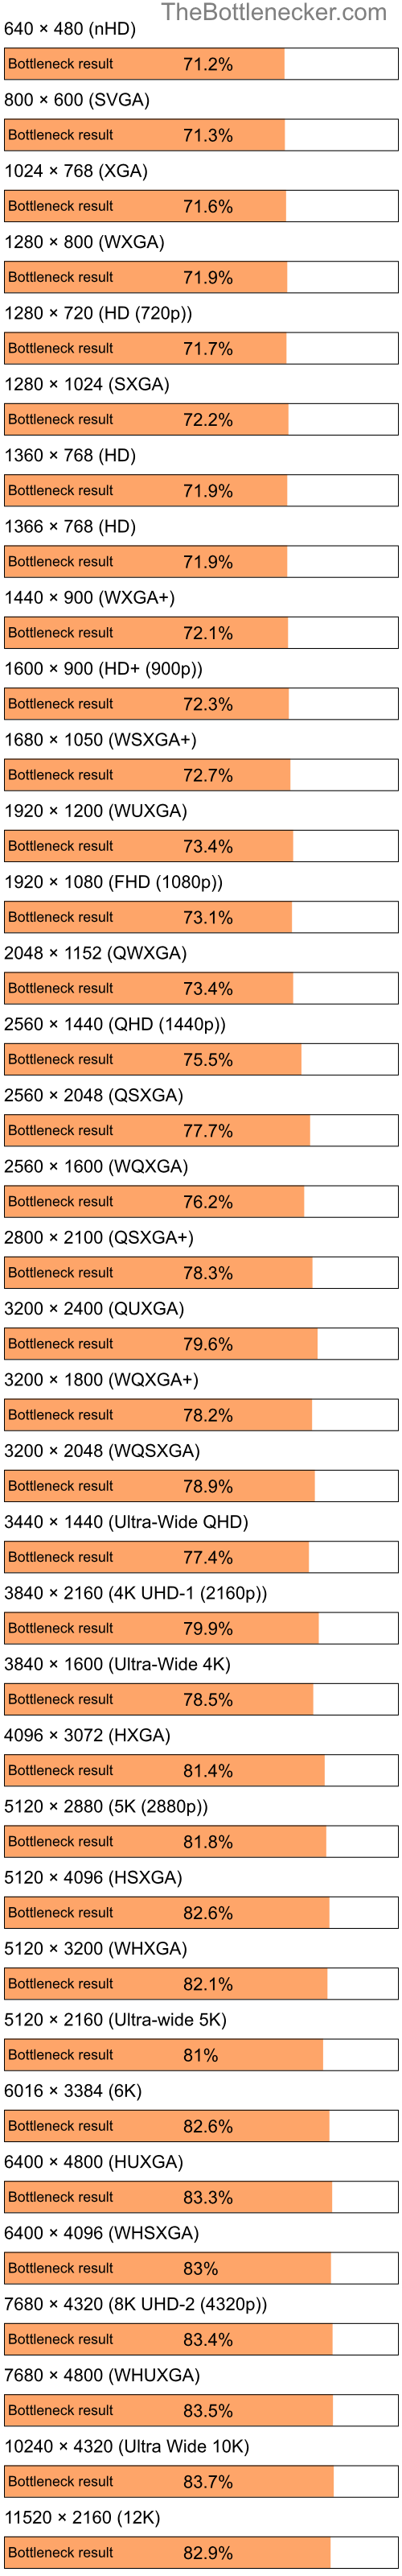 Bottleneck results by resolution for Intel Pentium 4 and NVIDIA GeForce G205M in Graphic Card Intense Tasks